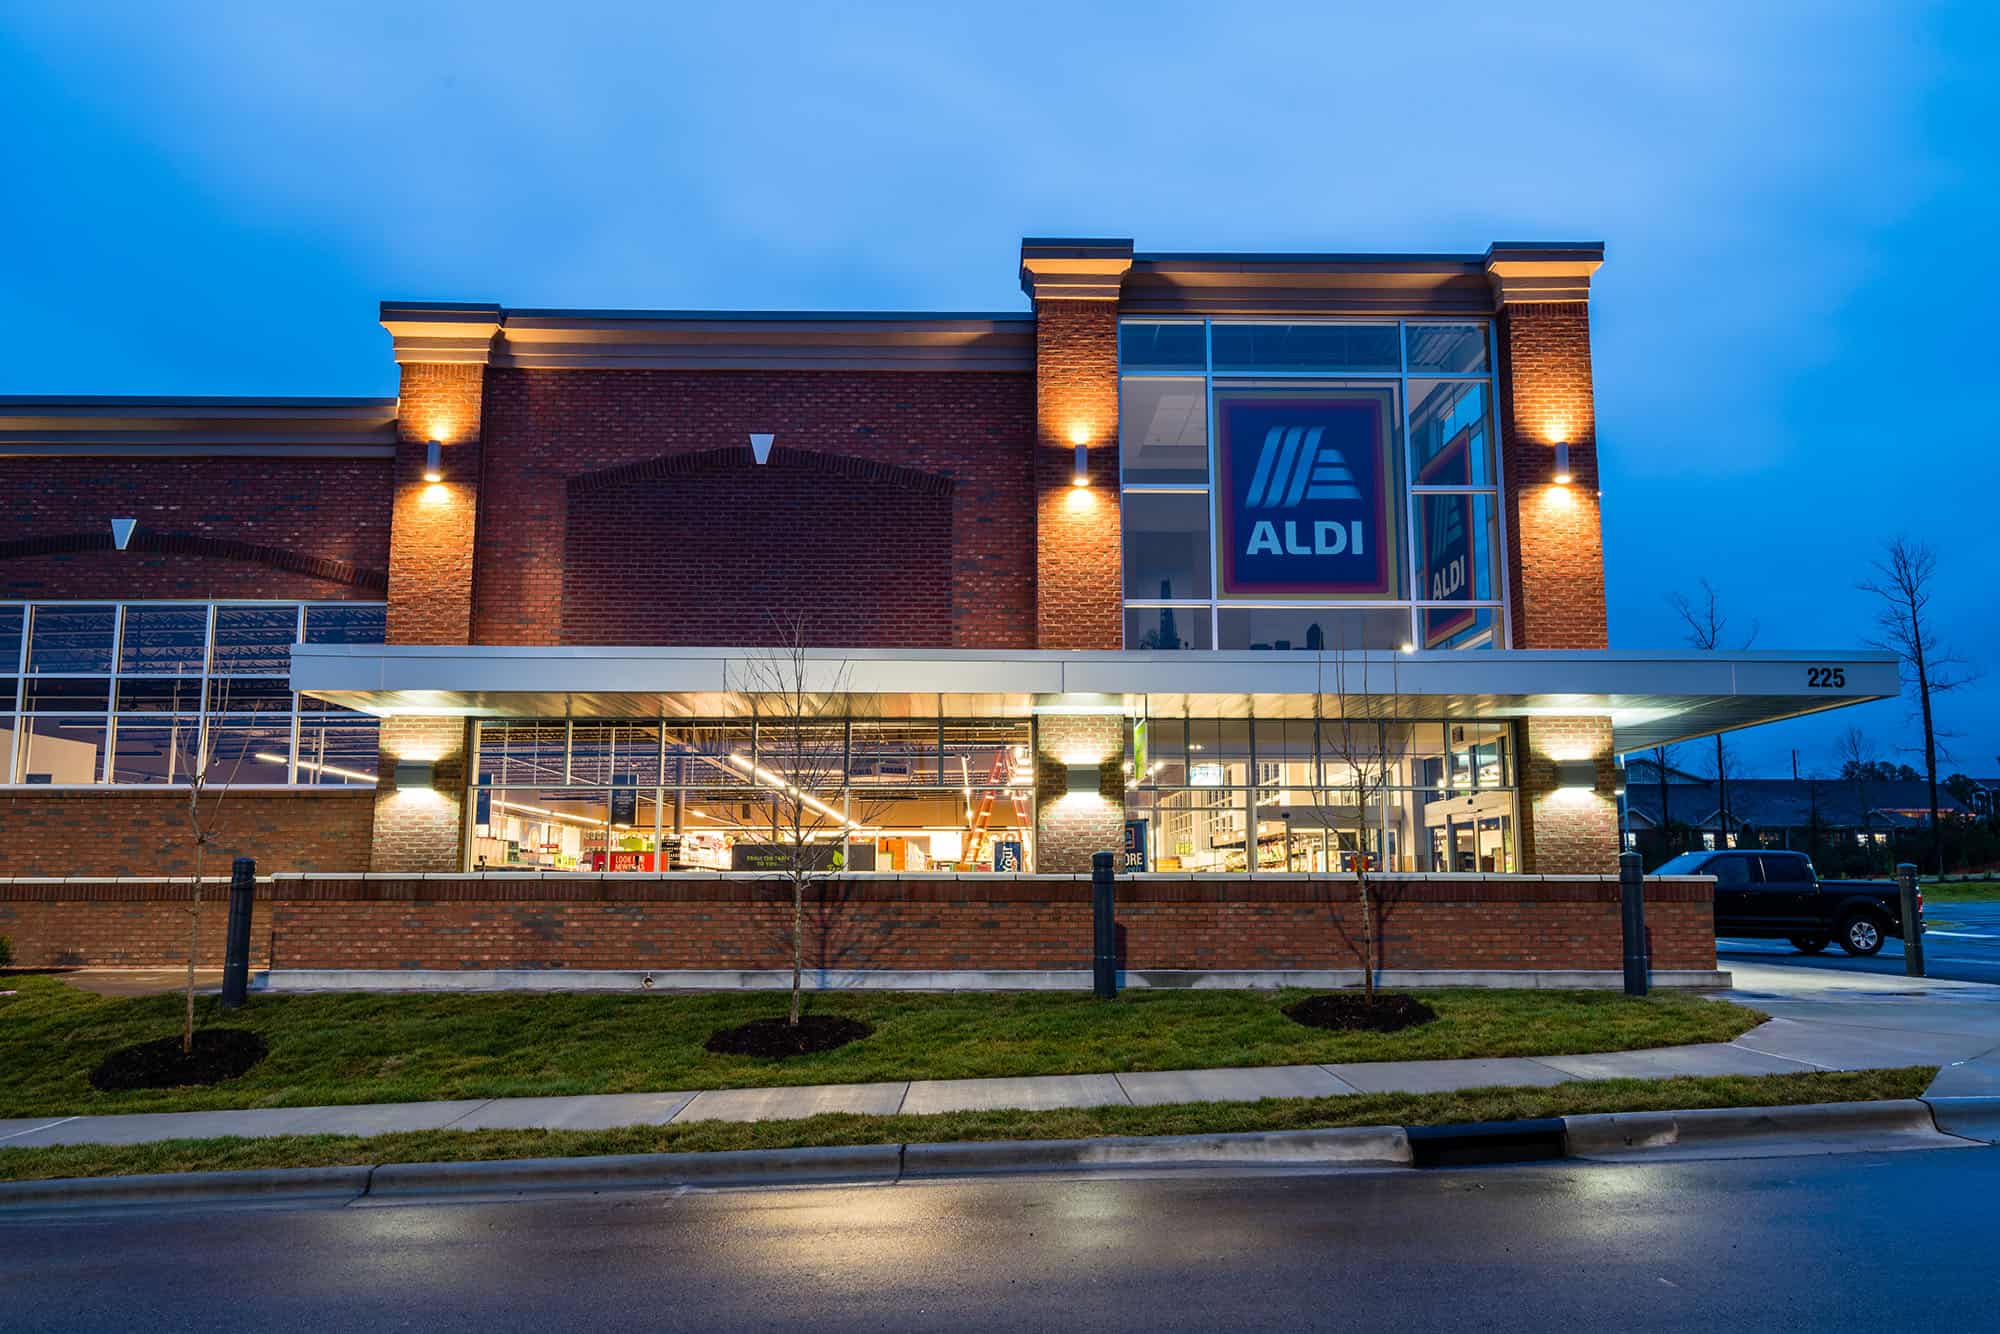 Night time, lit, side view from the street of our Aldi building project in Cary, NC